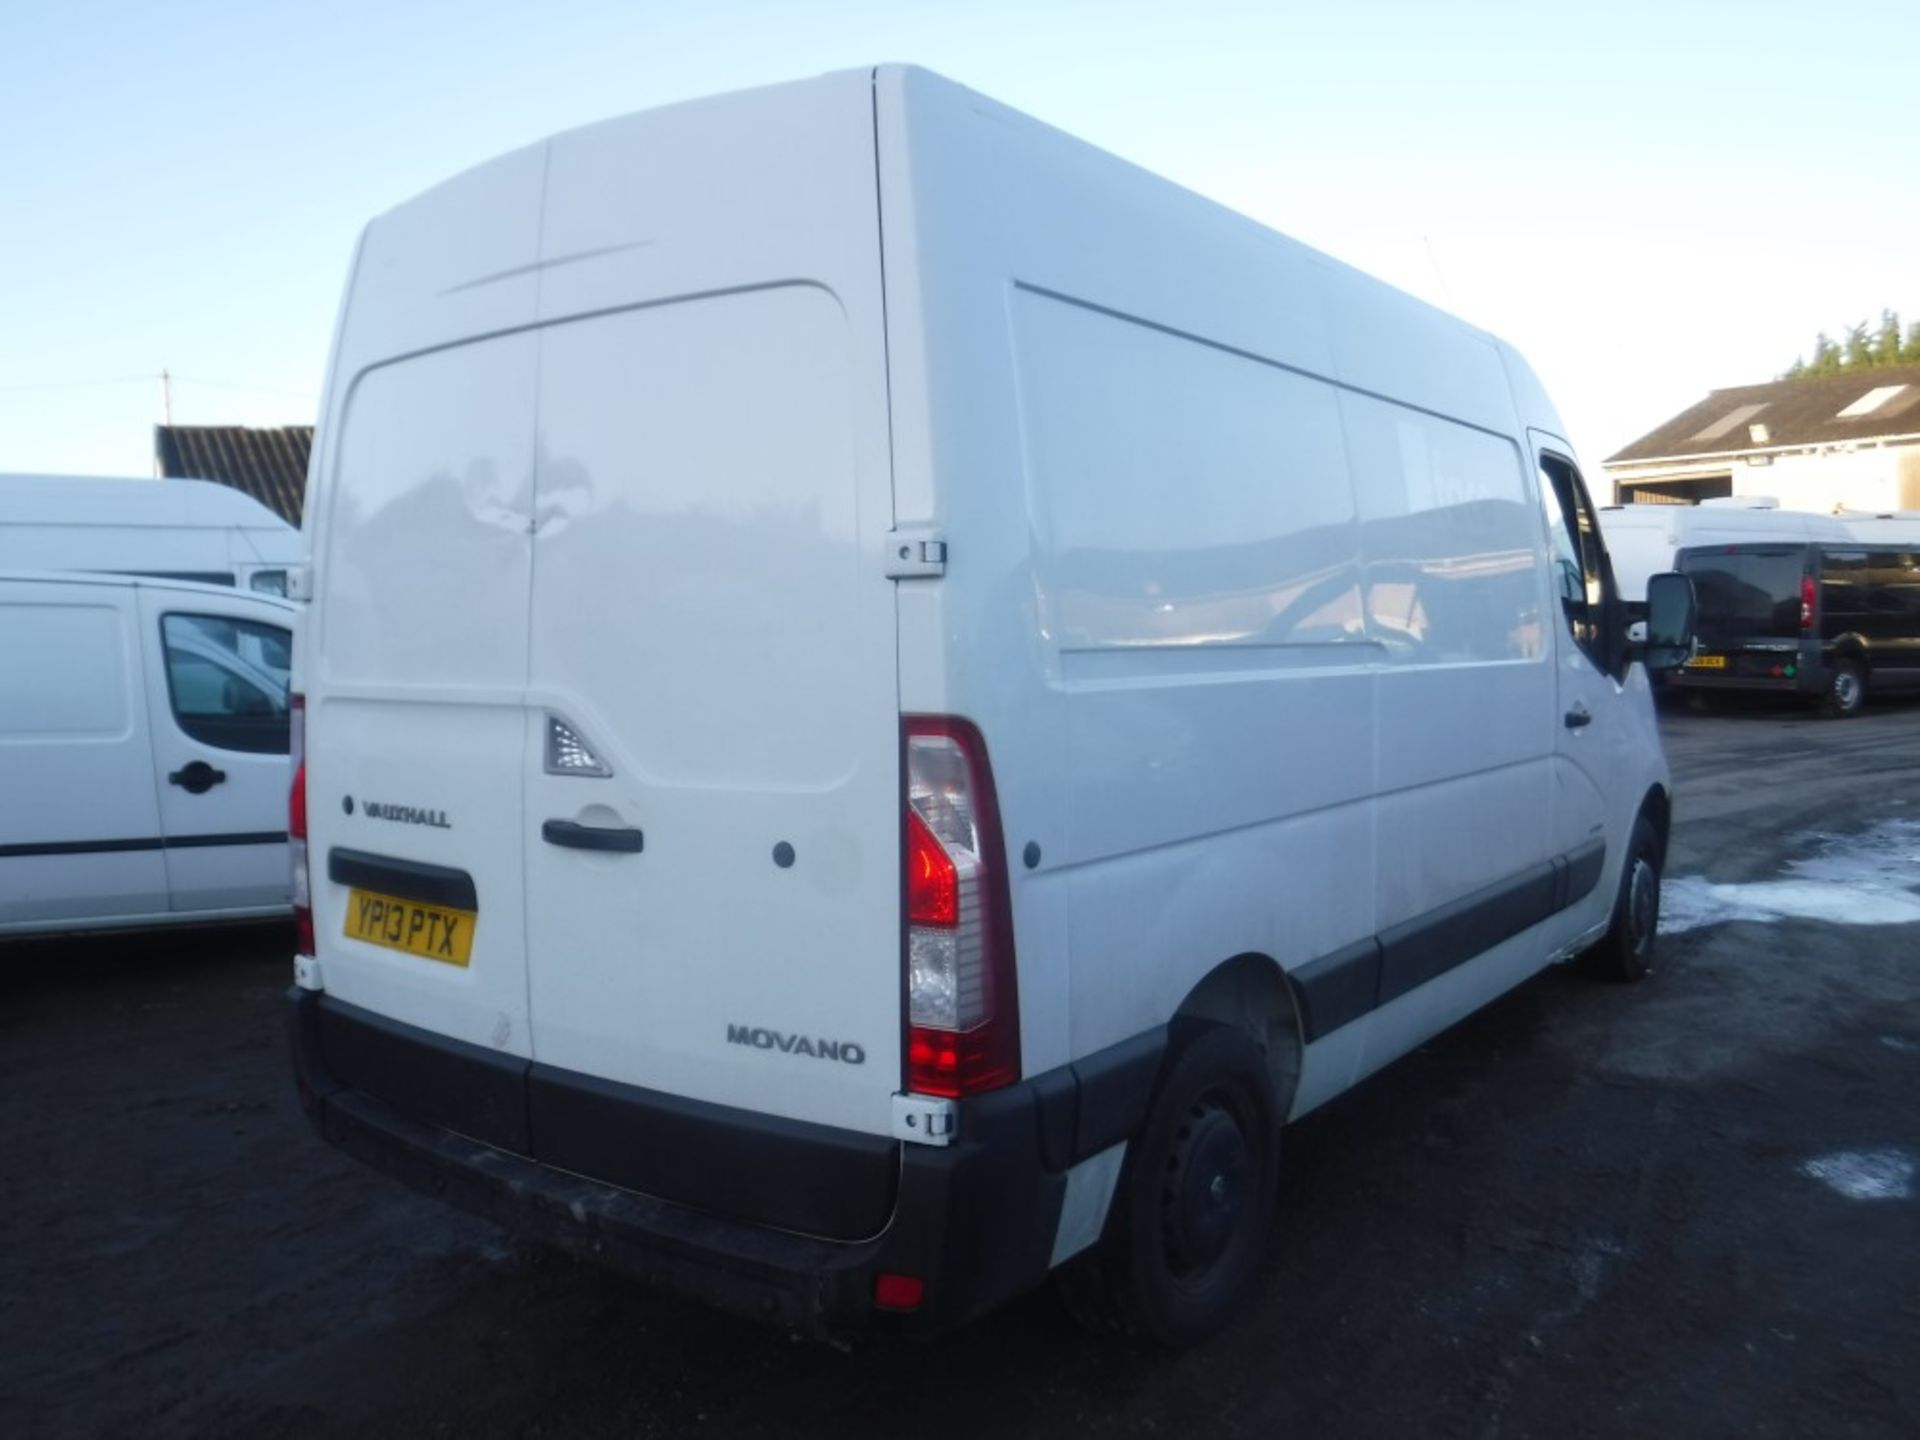 13 reg VAUXHALL MOVANO F3500 CDTI, 1ST REG 05/13, TEST 05/19, 106875M, V5 HERE, 1 OWNER FROM - Image 4 of 6